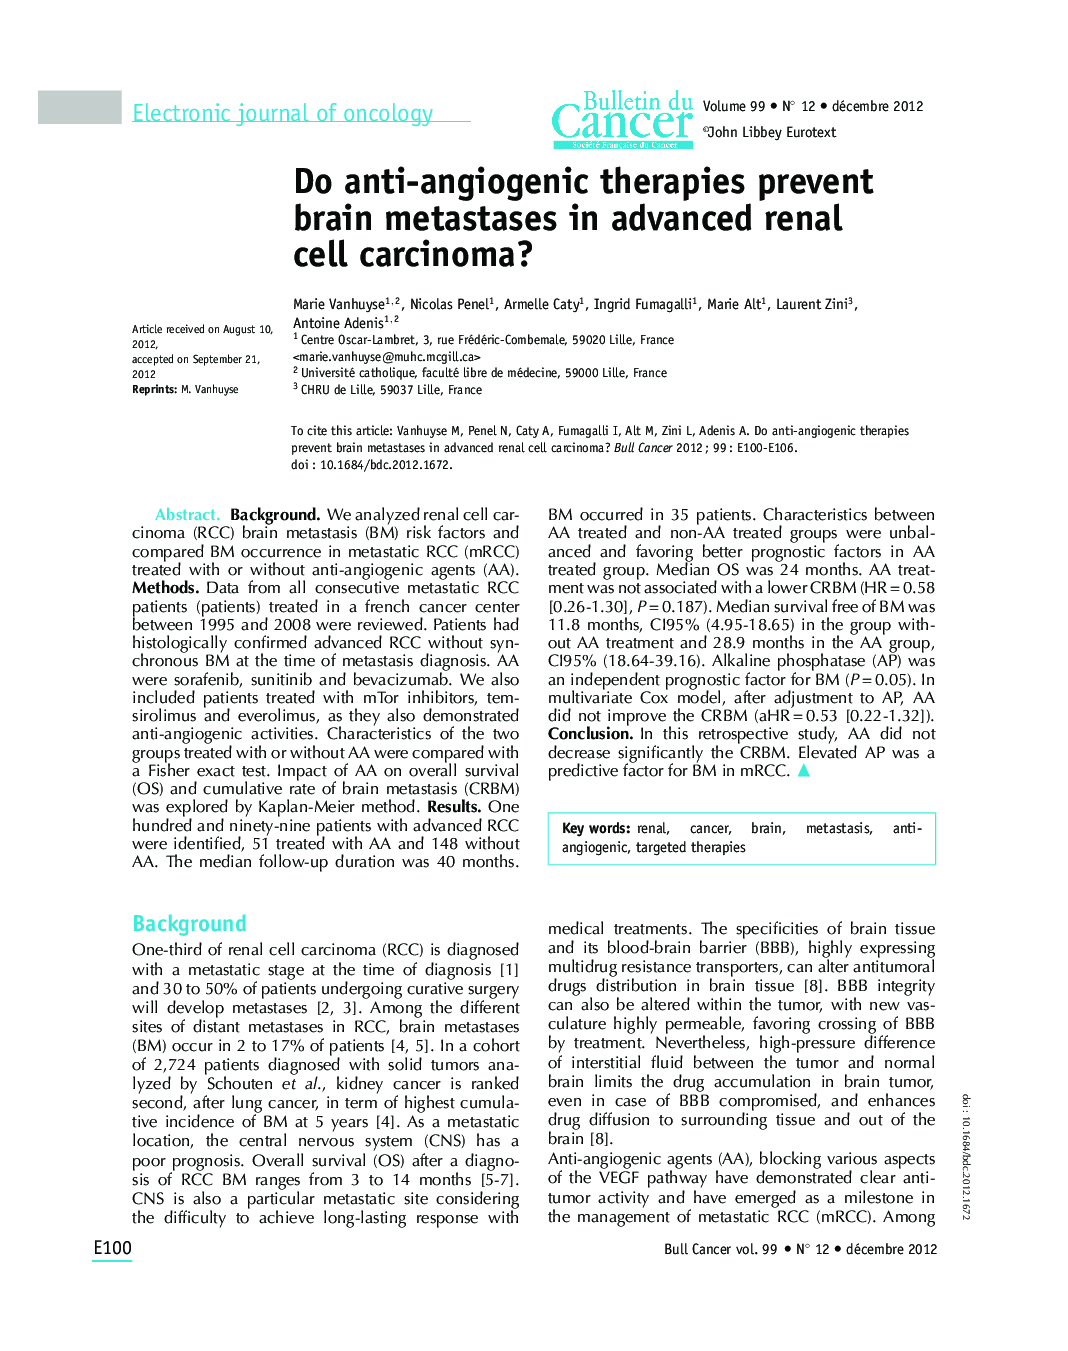 Do anti-angiogenic therapies prevent brain metastases in advanced renal cell carcinoma?